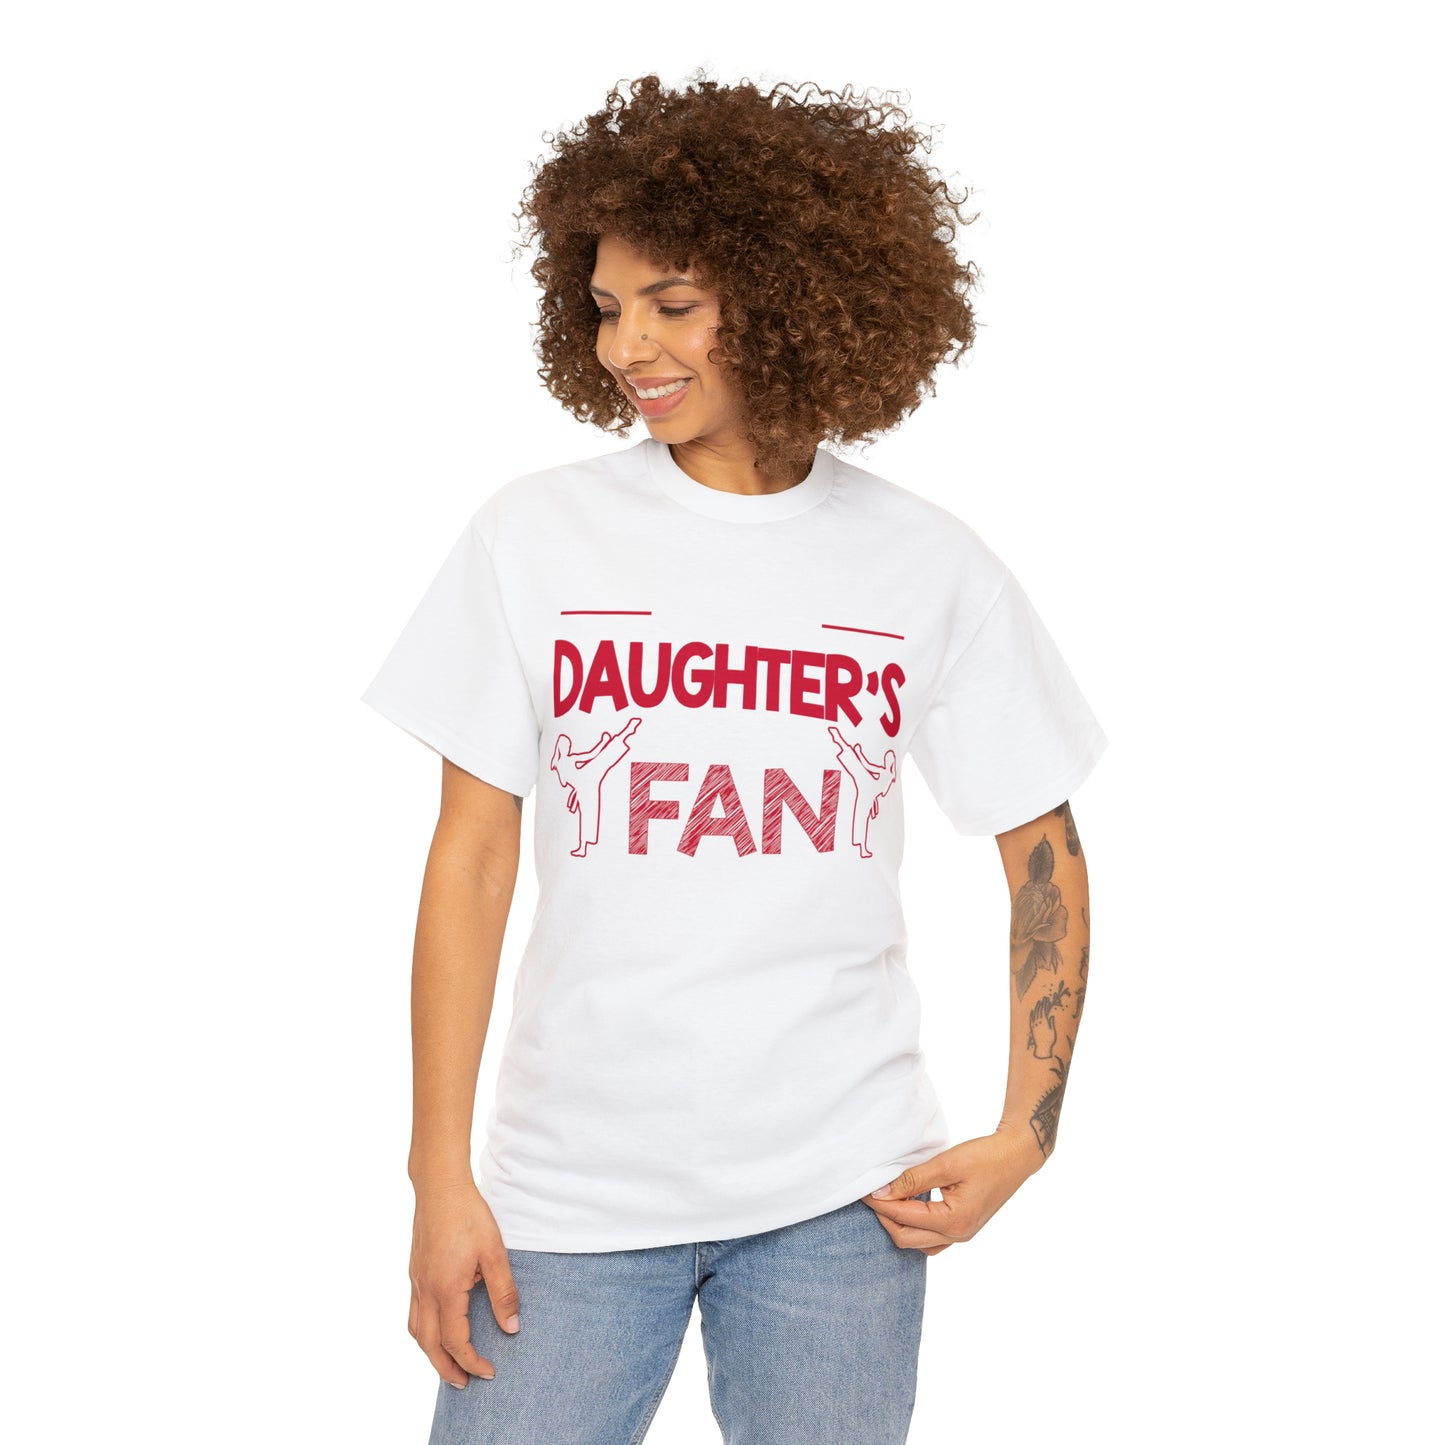 My Daughter's Greatest Fan! Shirt For Mom or Dad Heavy Cotton Tee